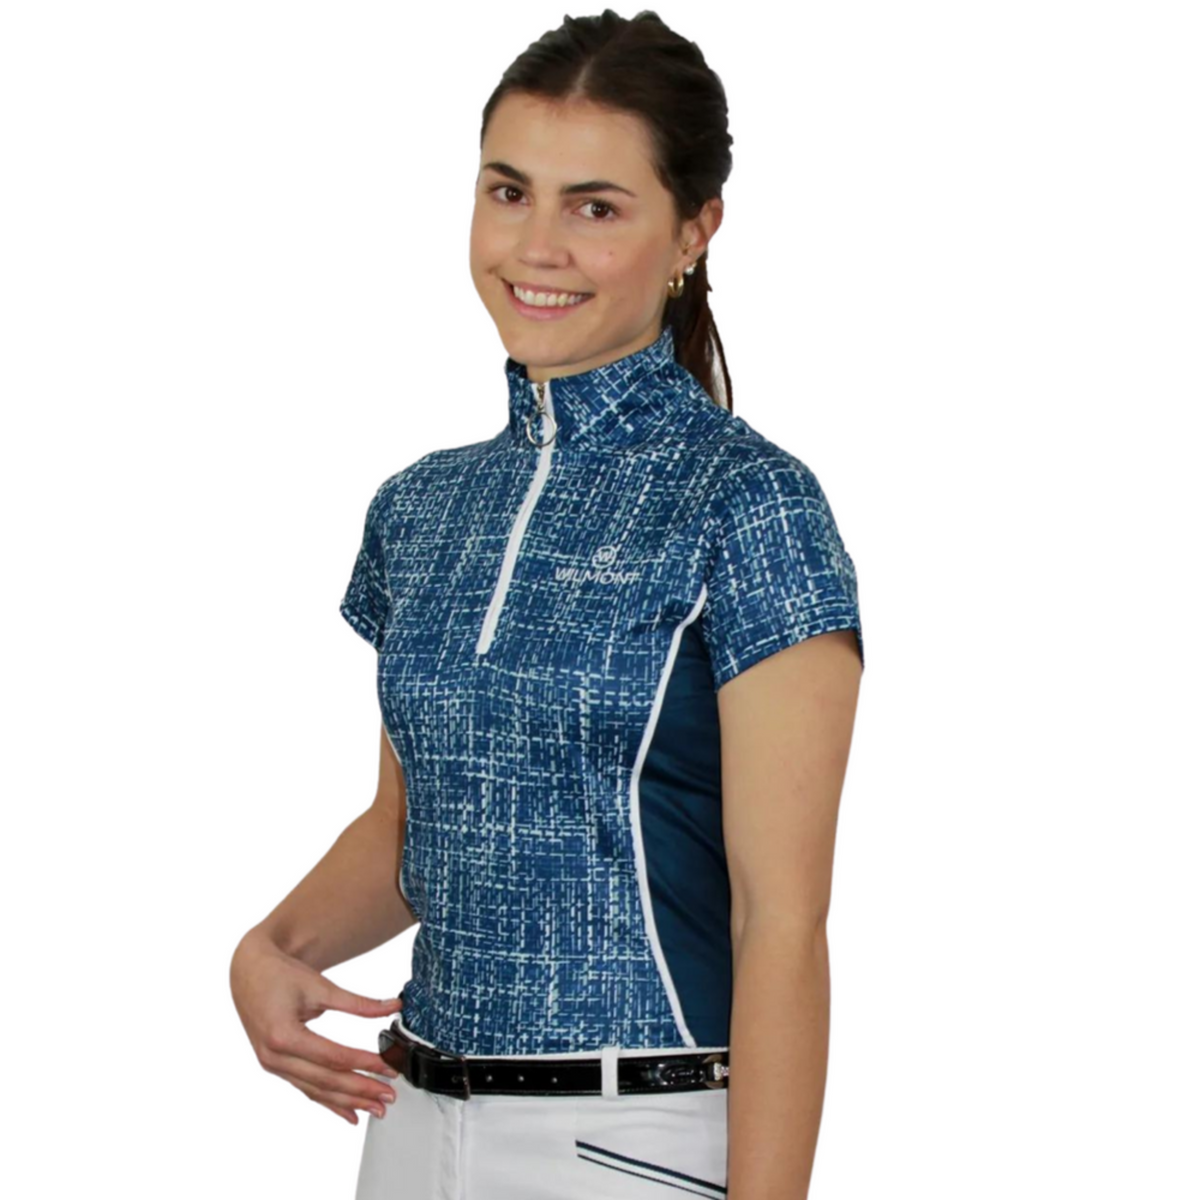 lady wearing blue and white short sleeve equestrian top